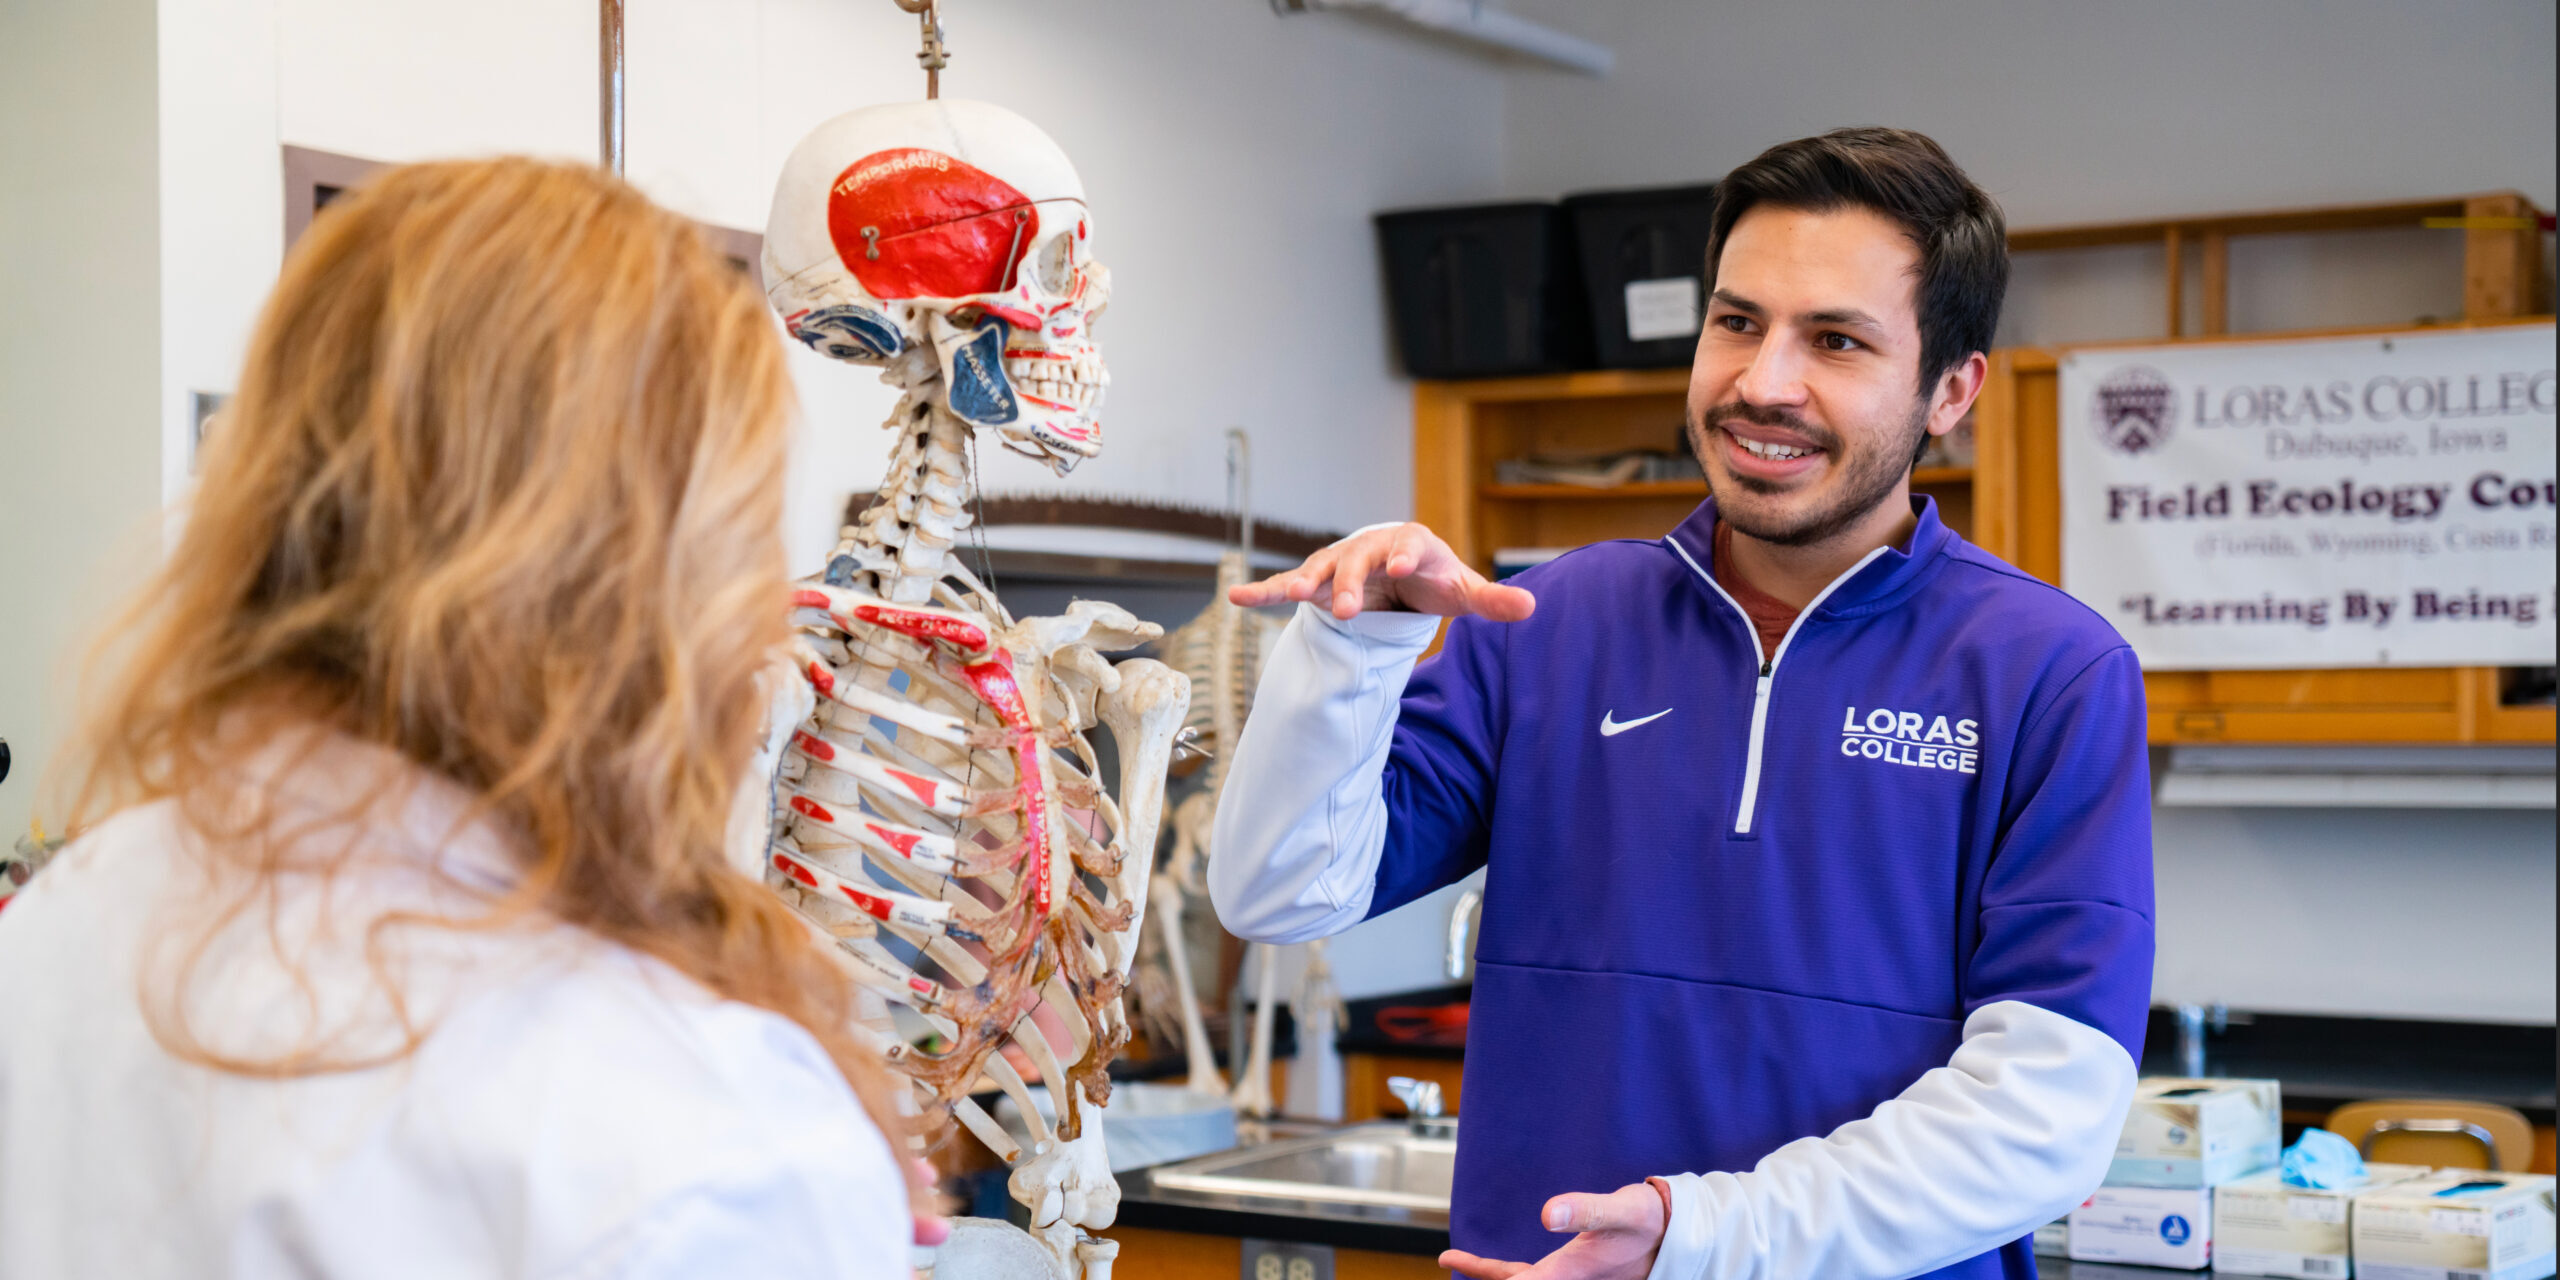 health-sciences-major-bachelor-of-science-degree-loras-college